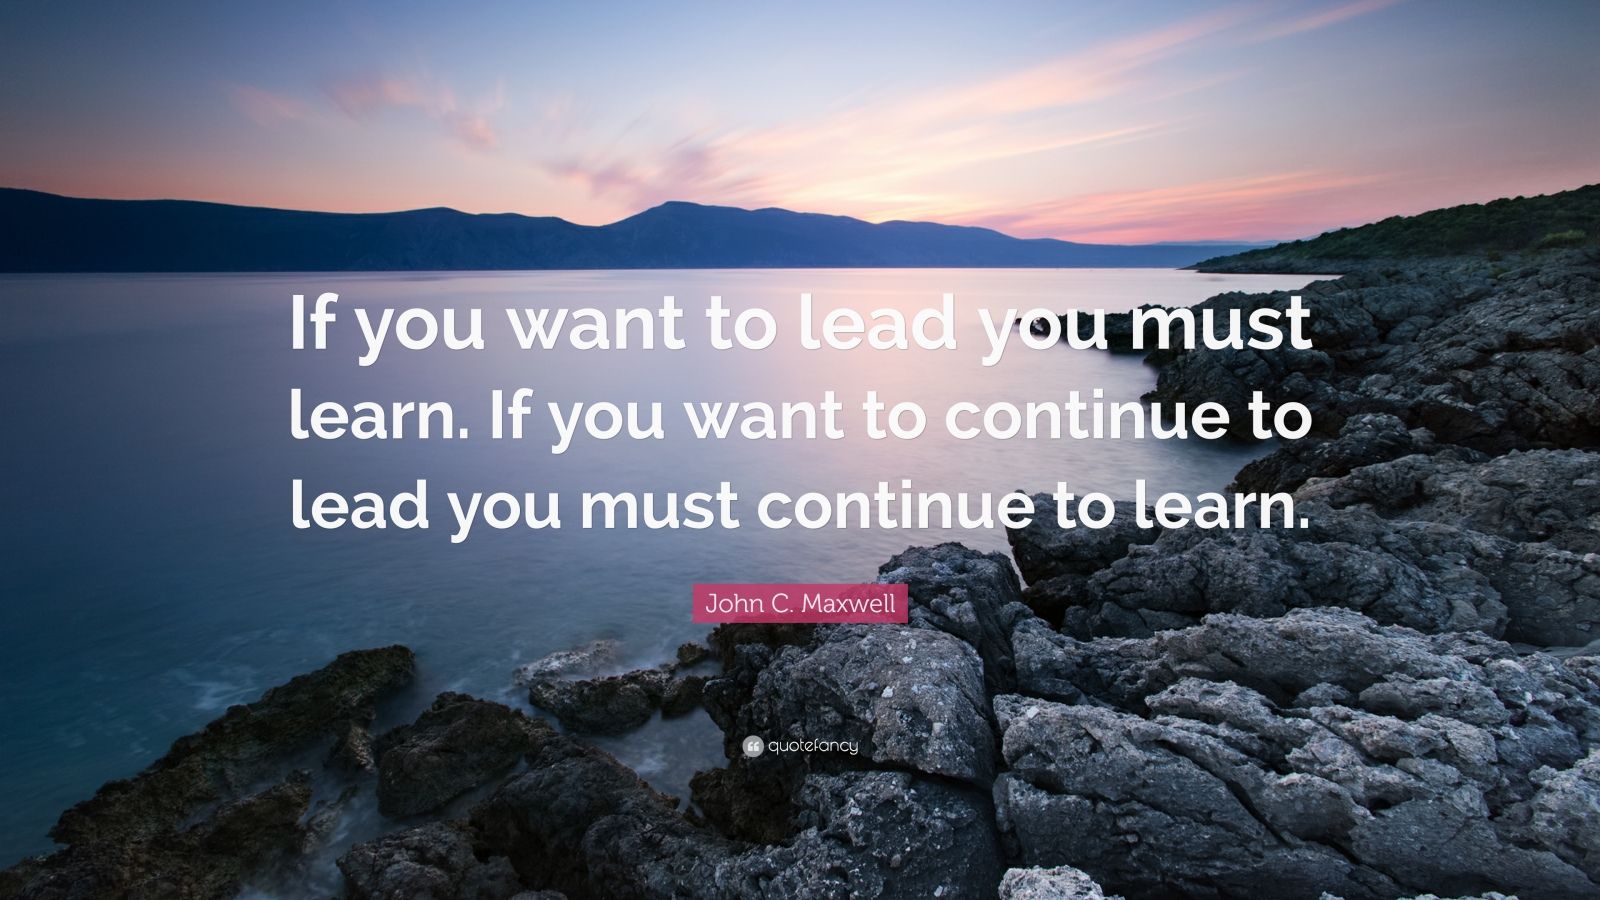 John C. Maxwell Quote “If you want to lead you must learn. If you want